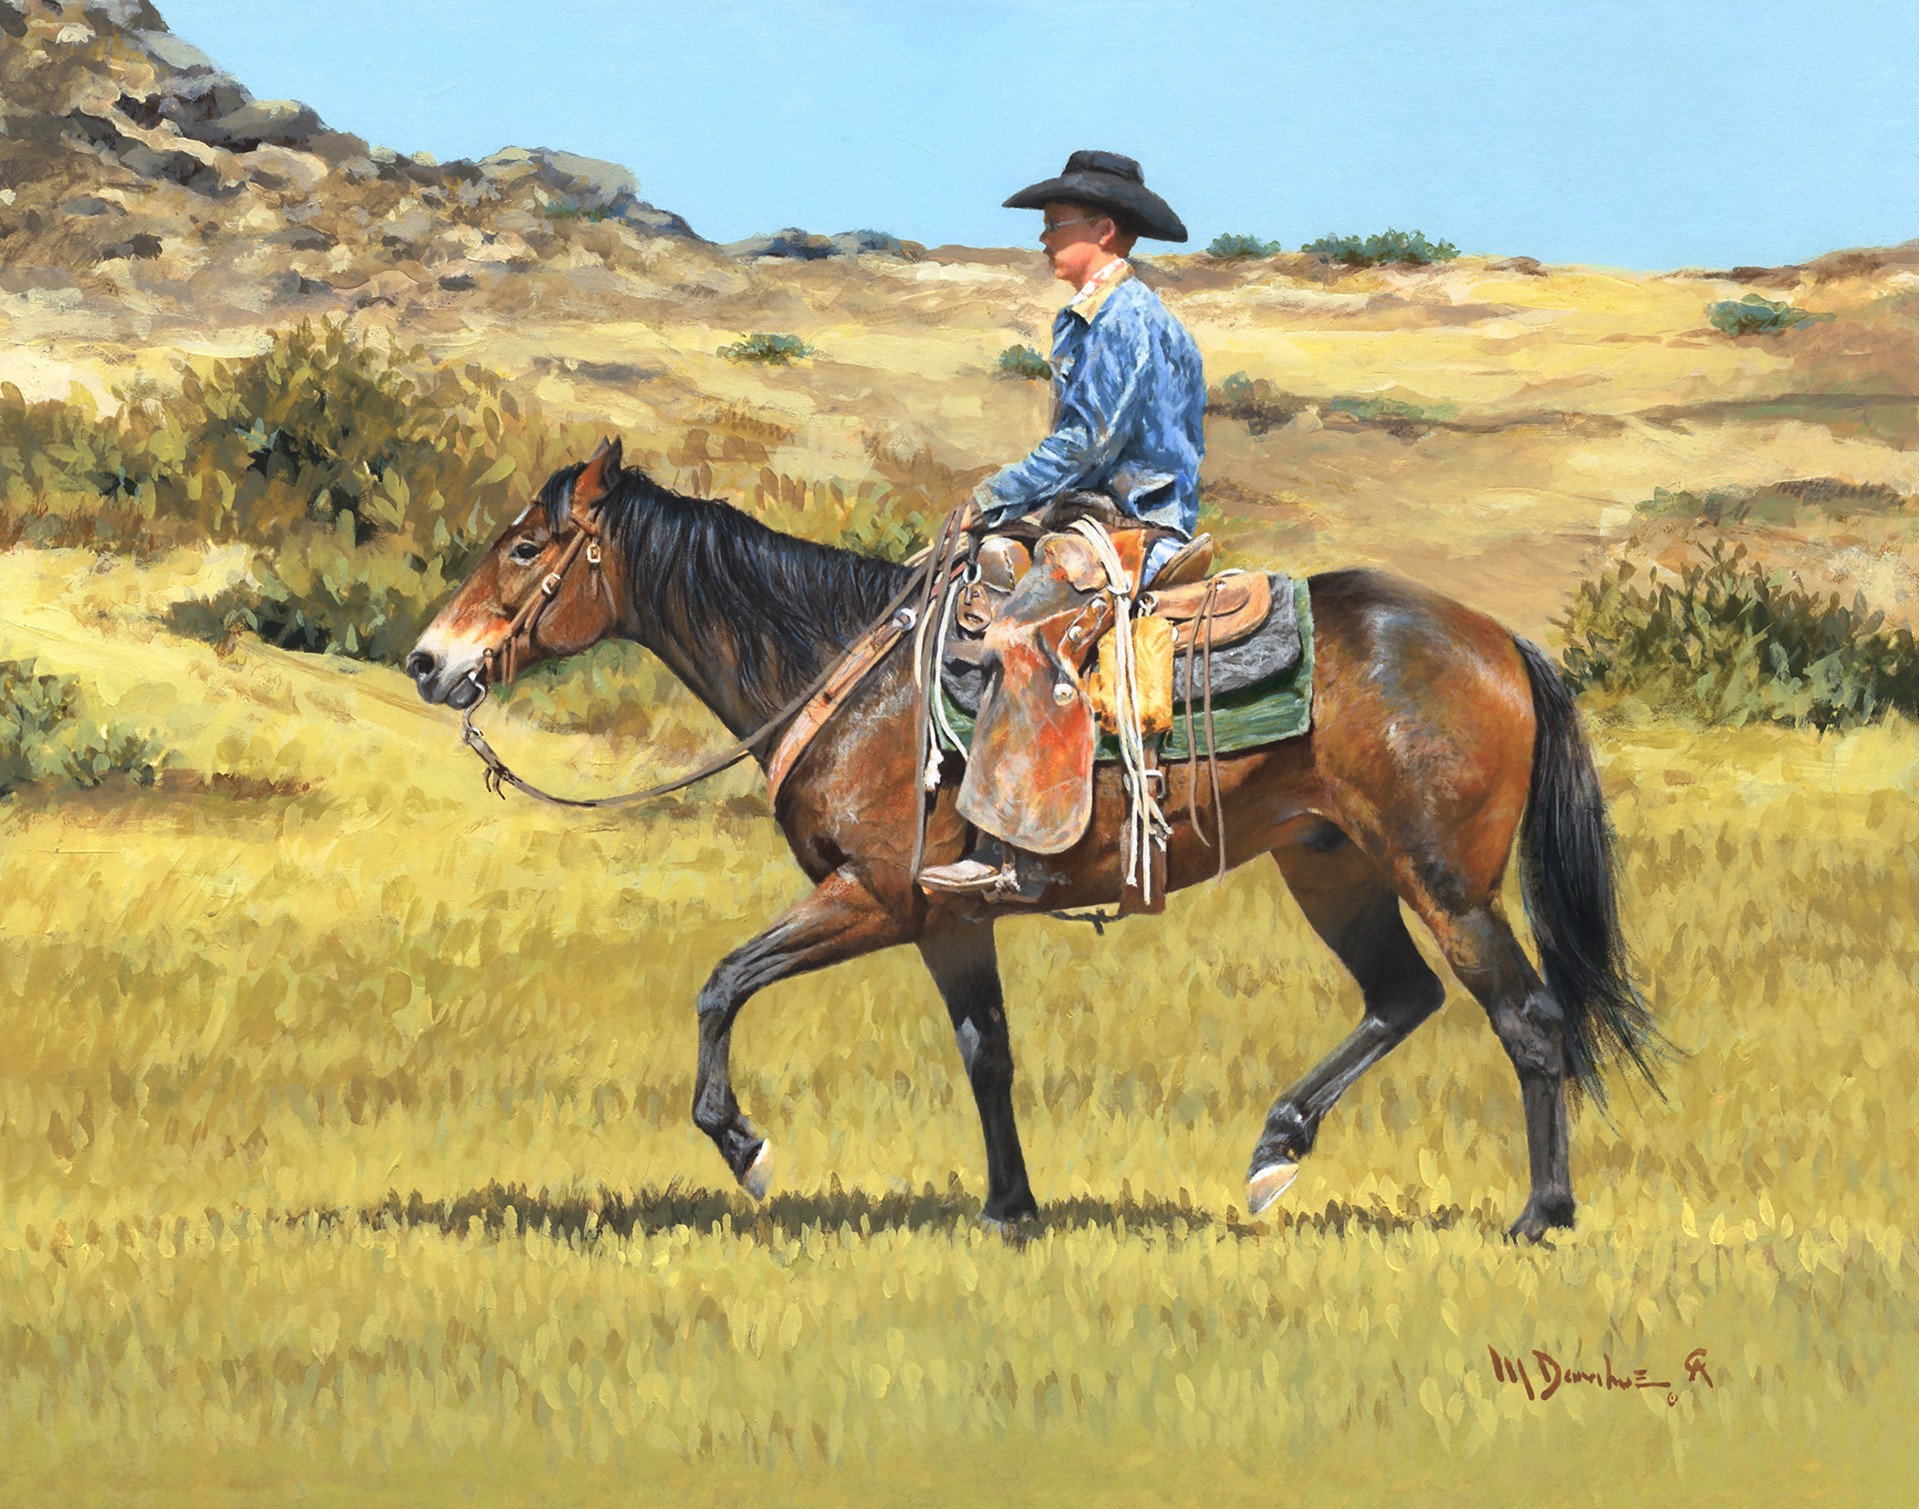 Back in the Saddle by Mikel Donahue